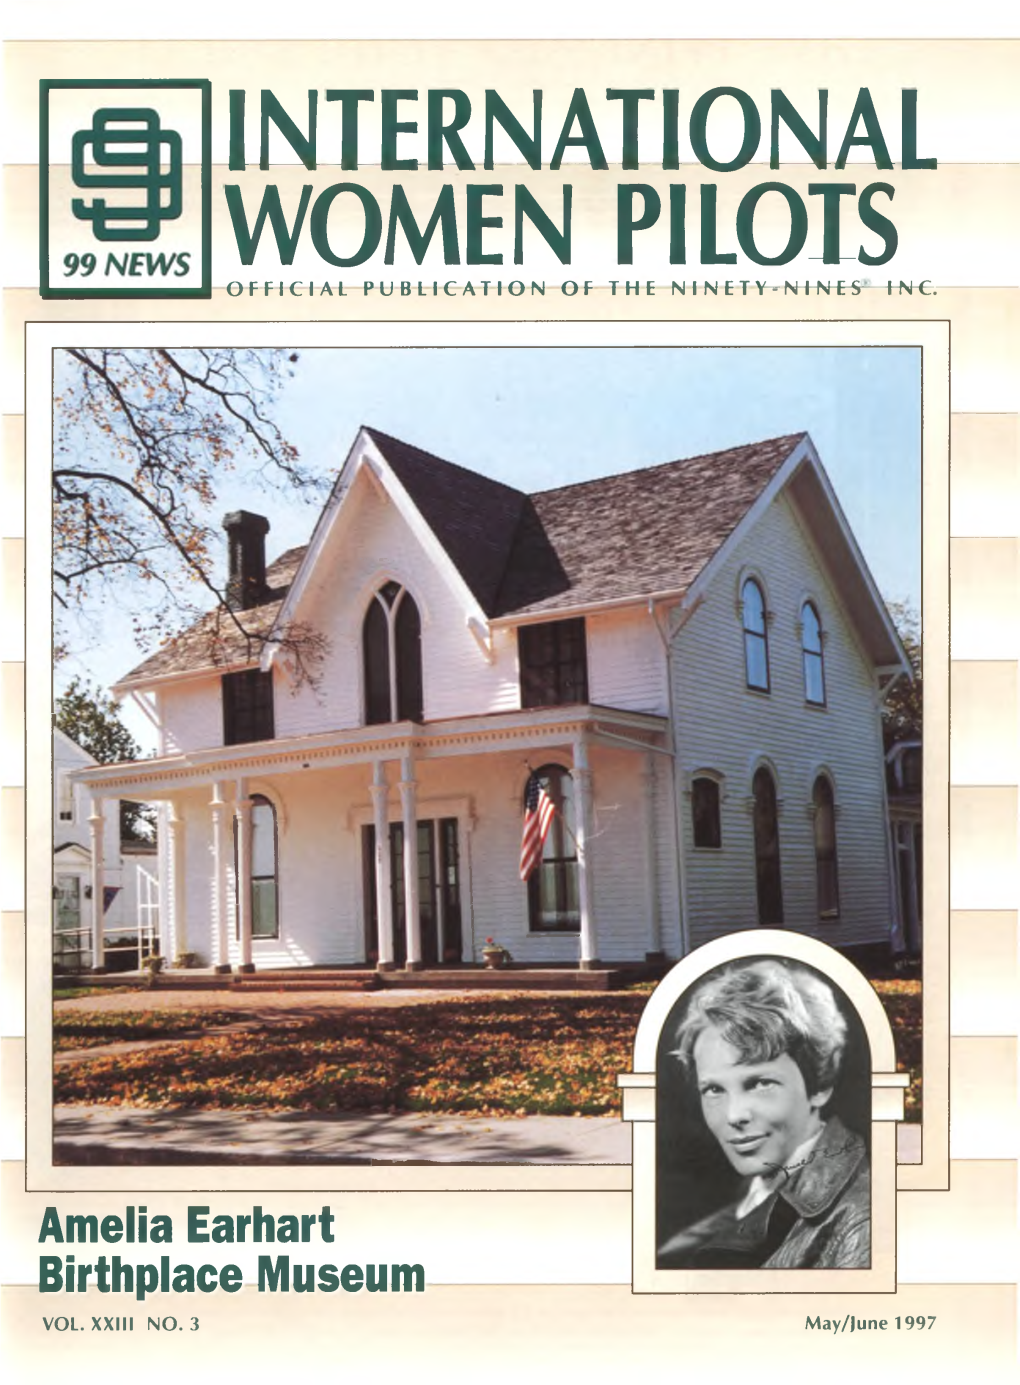 International Women Pilots Official Publication of the Ninety-Nines Inc